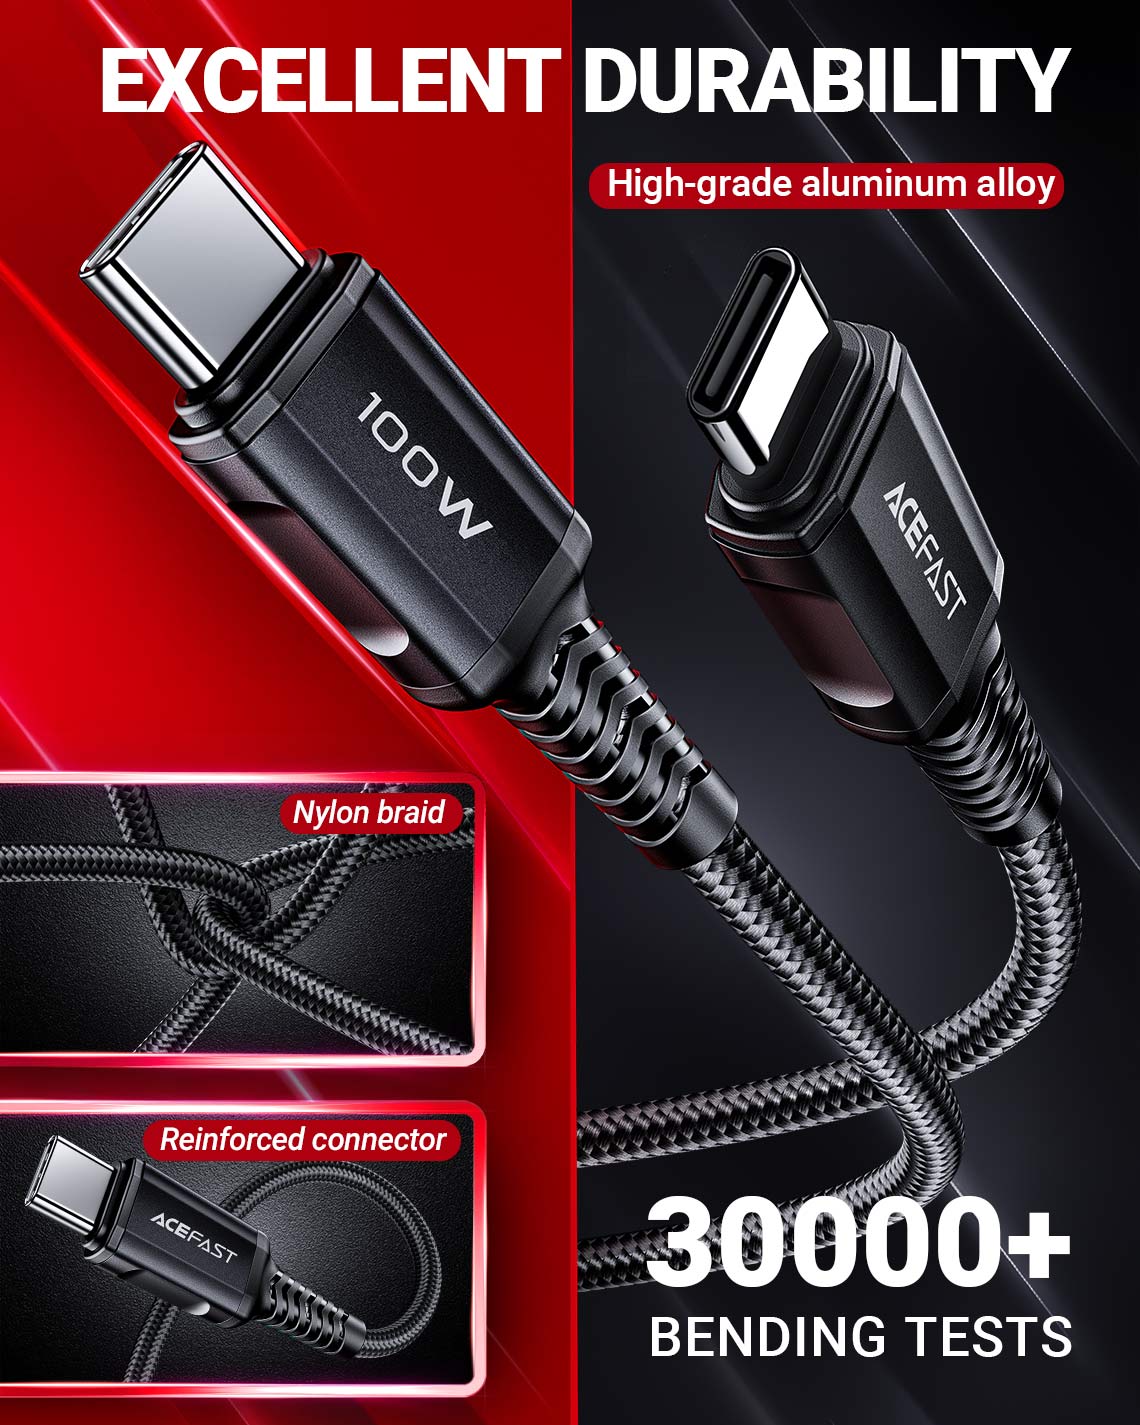 acefast c4 03 usbc to usbc 100w charging data cable excellent durability